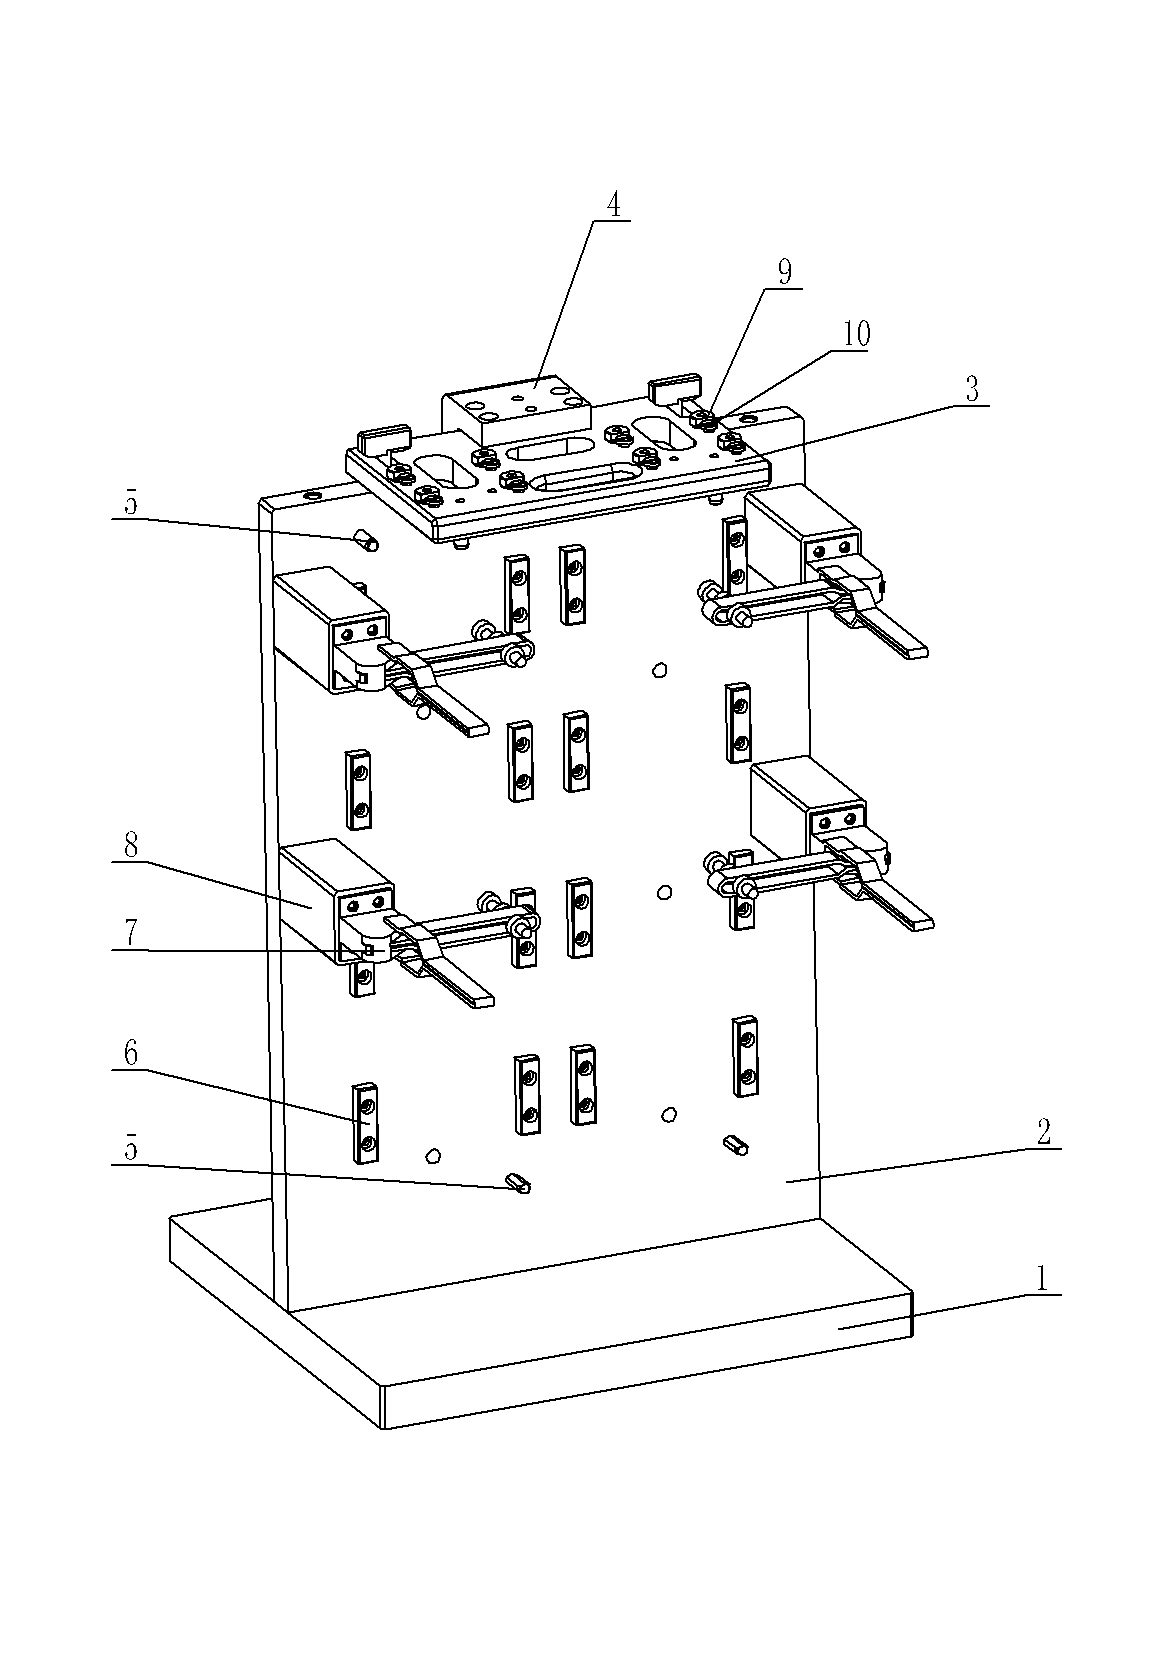 Drilling fixture for cylinder cover